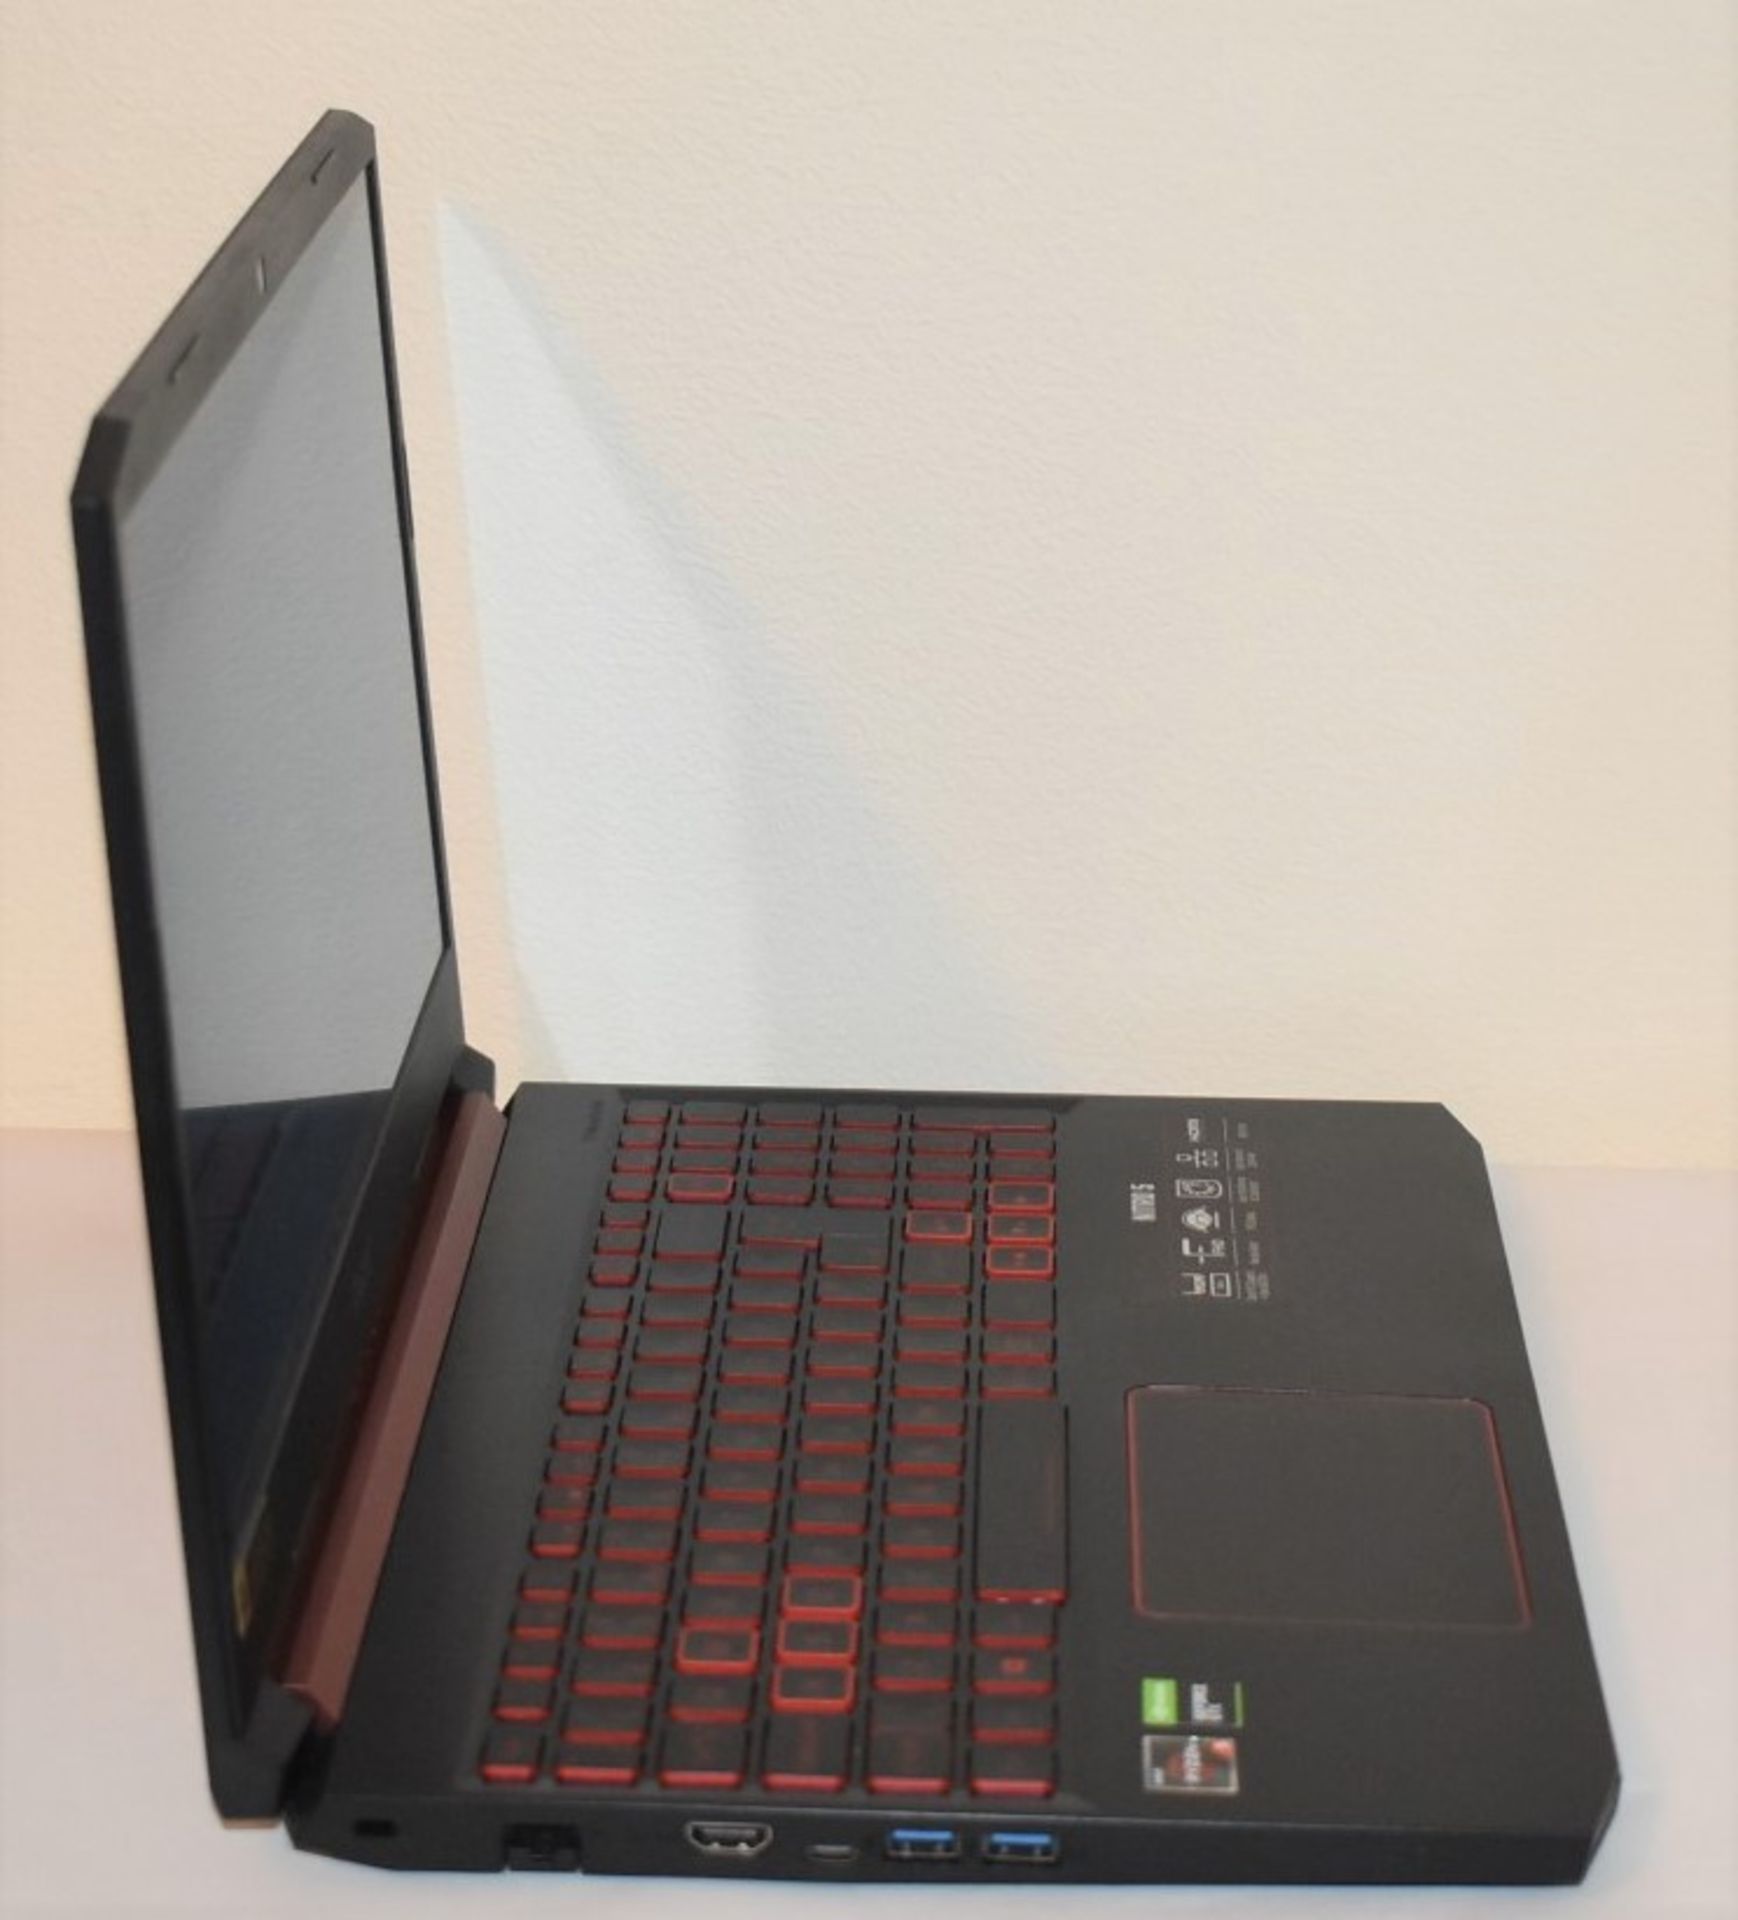 1 x Acer Nitro 5 Gaming Laptop - Features Ryzen 5 Processor, 16g DDR4 Ram, 250gb M.2 System SSD, - Image 12 of 20